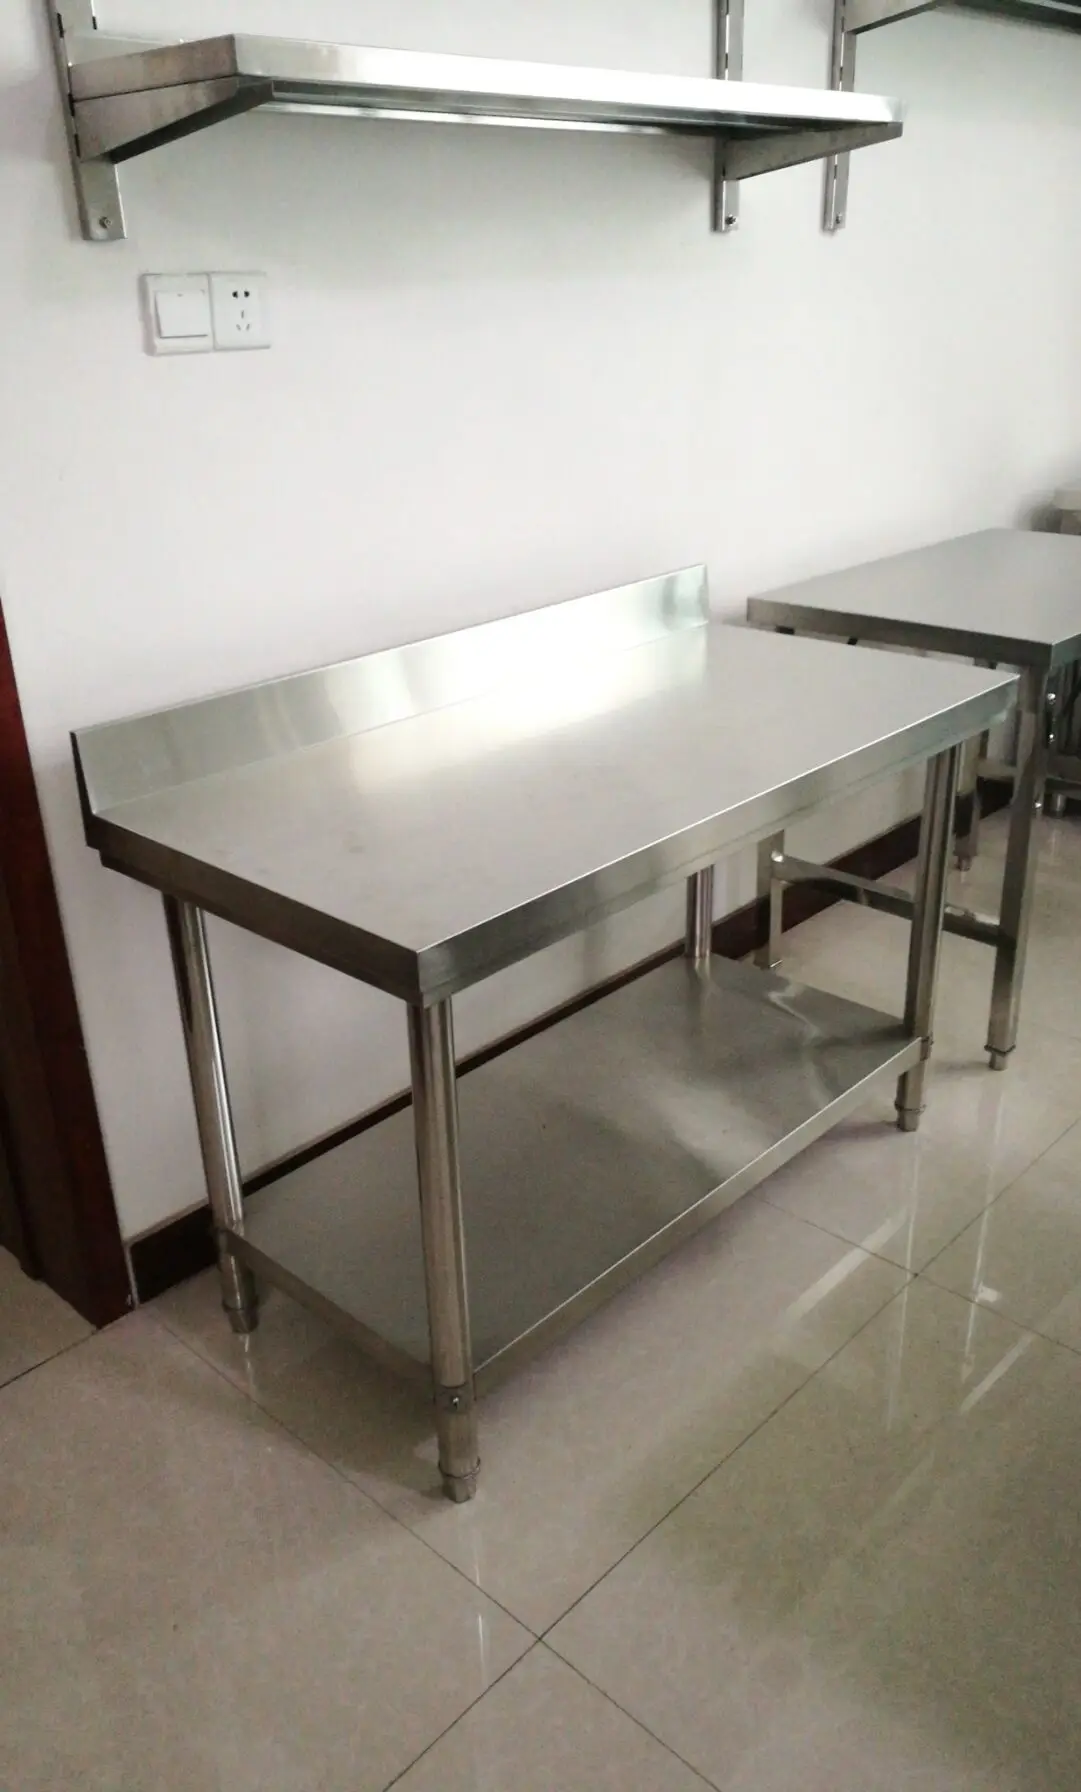 Stainless Steel Work Table with undershelf